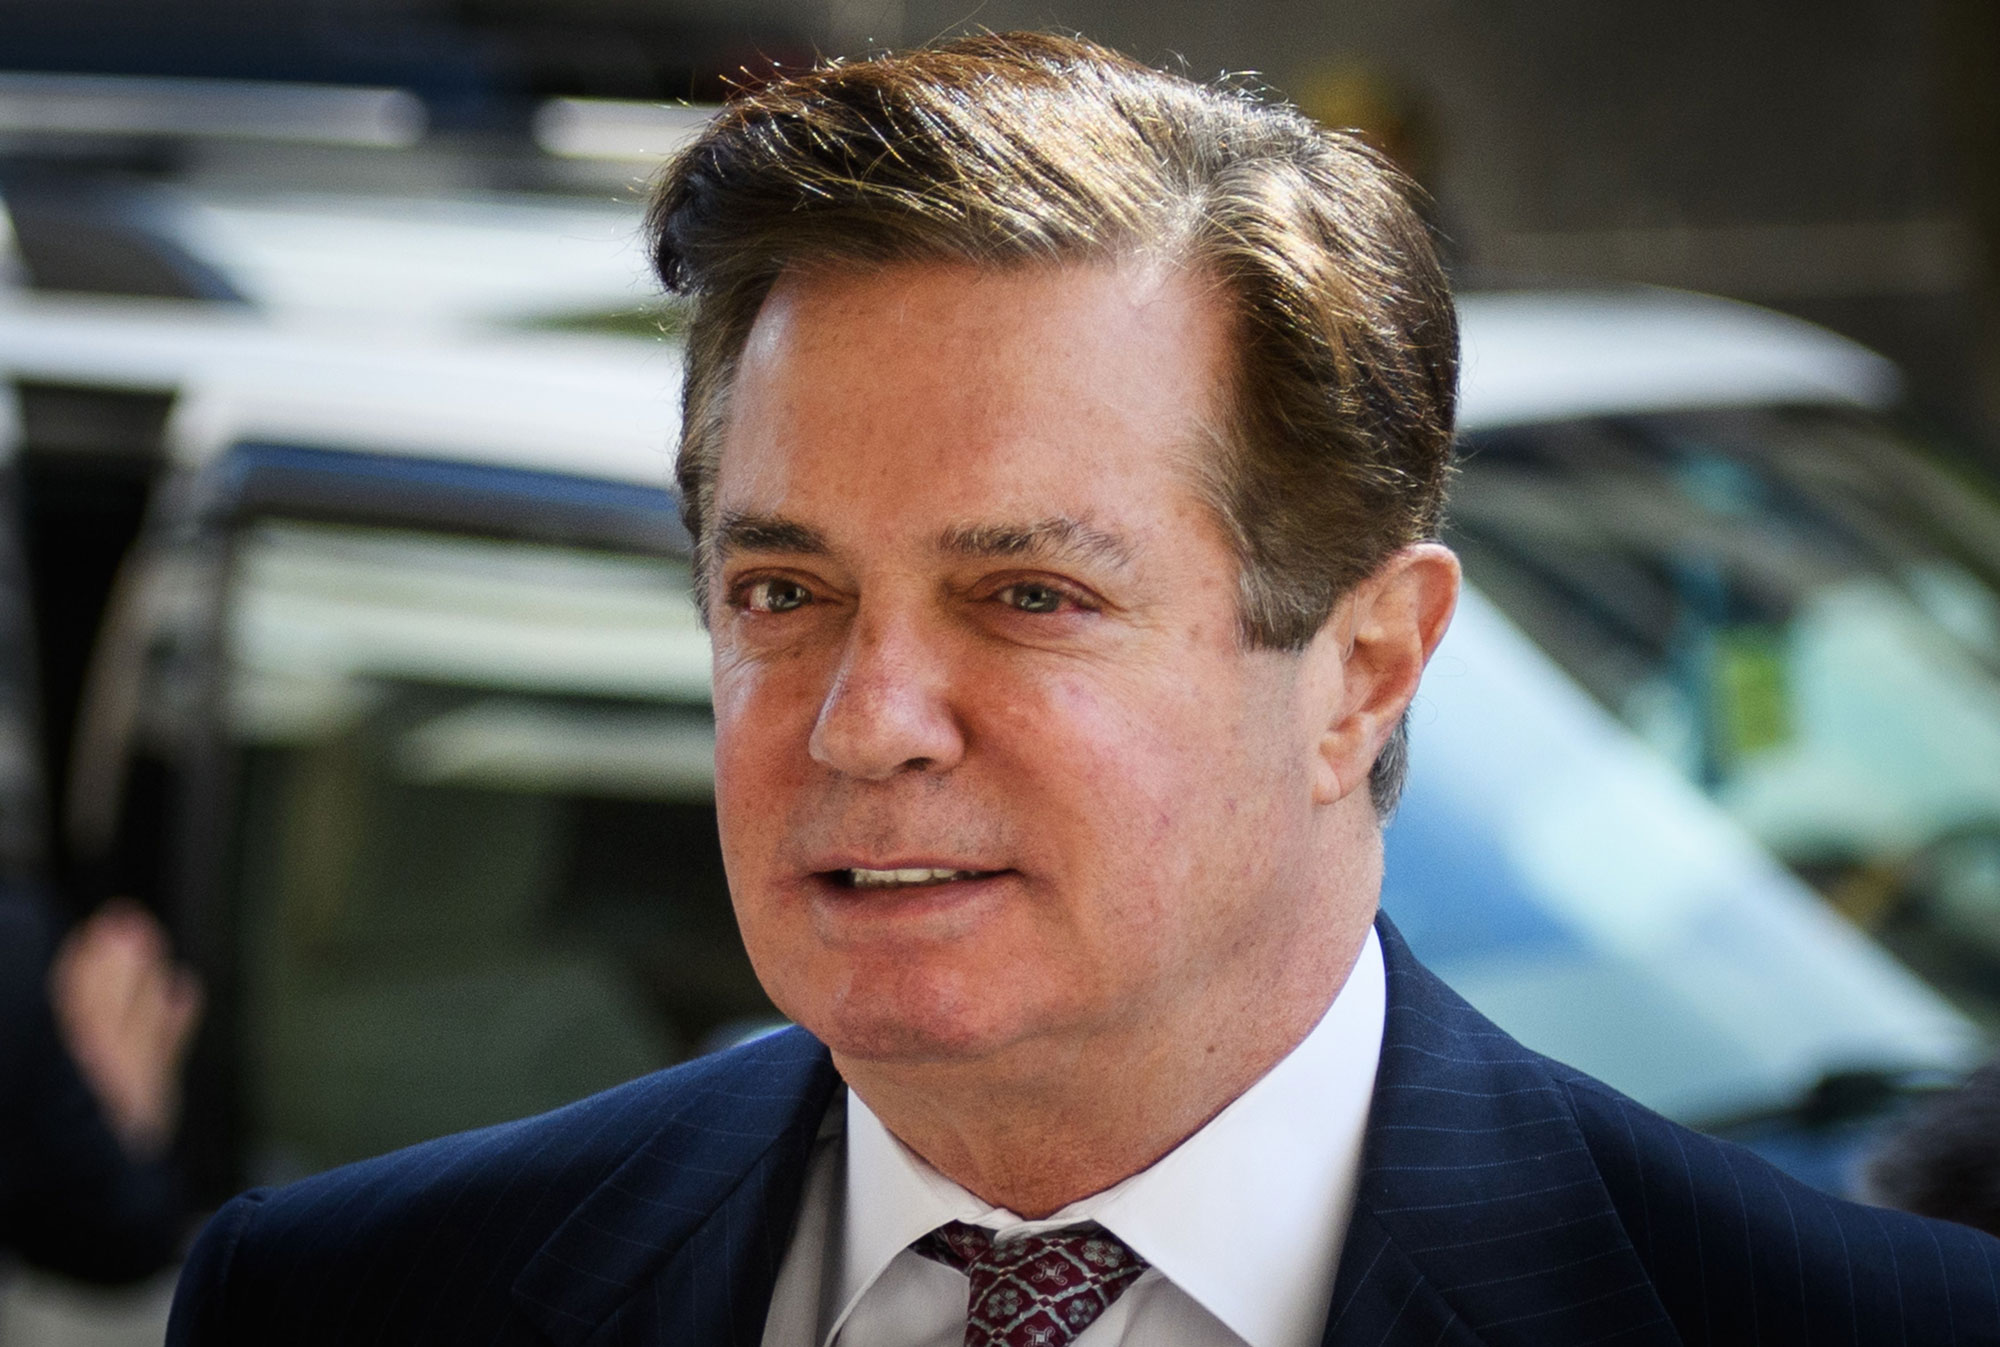 Paul Manafort arrives for a hearing at US District Court on June 15, 2018 in Washington.